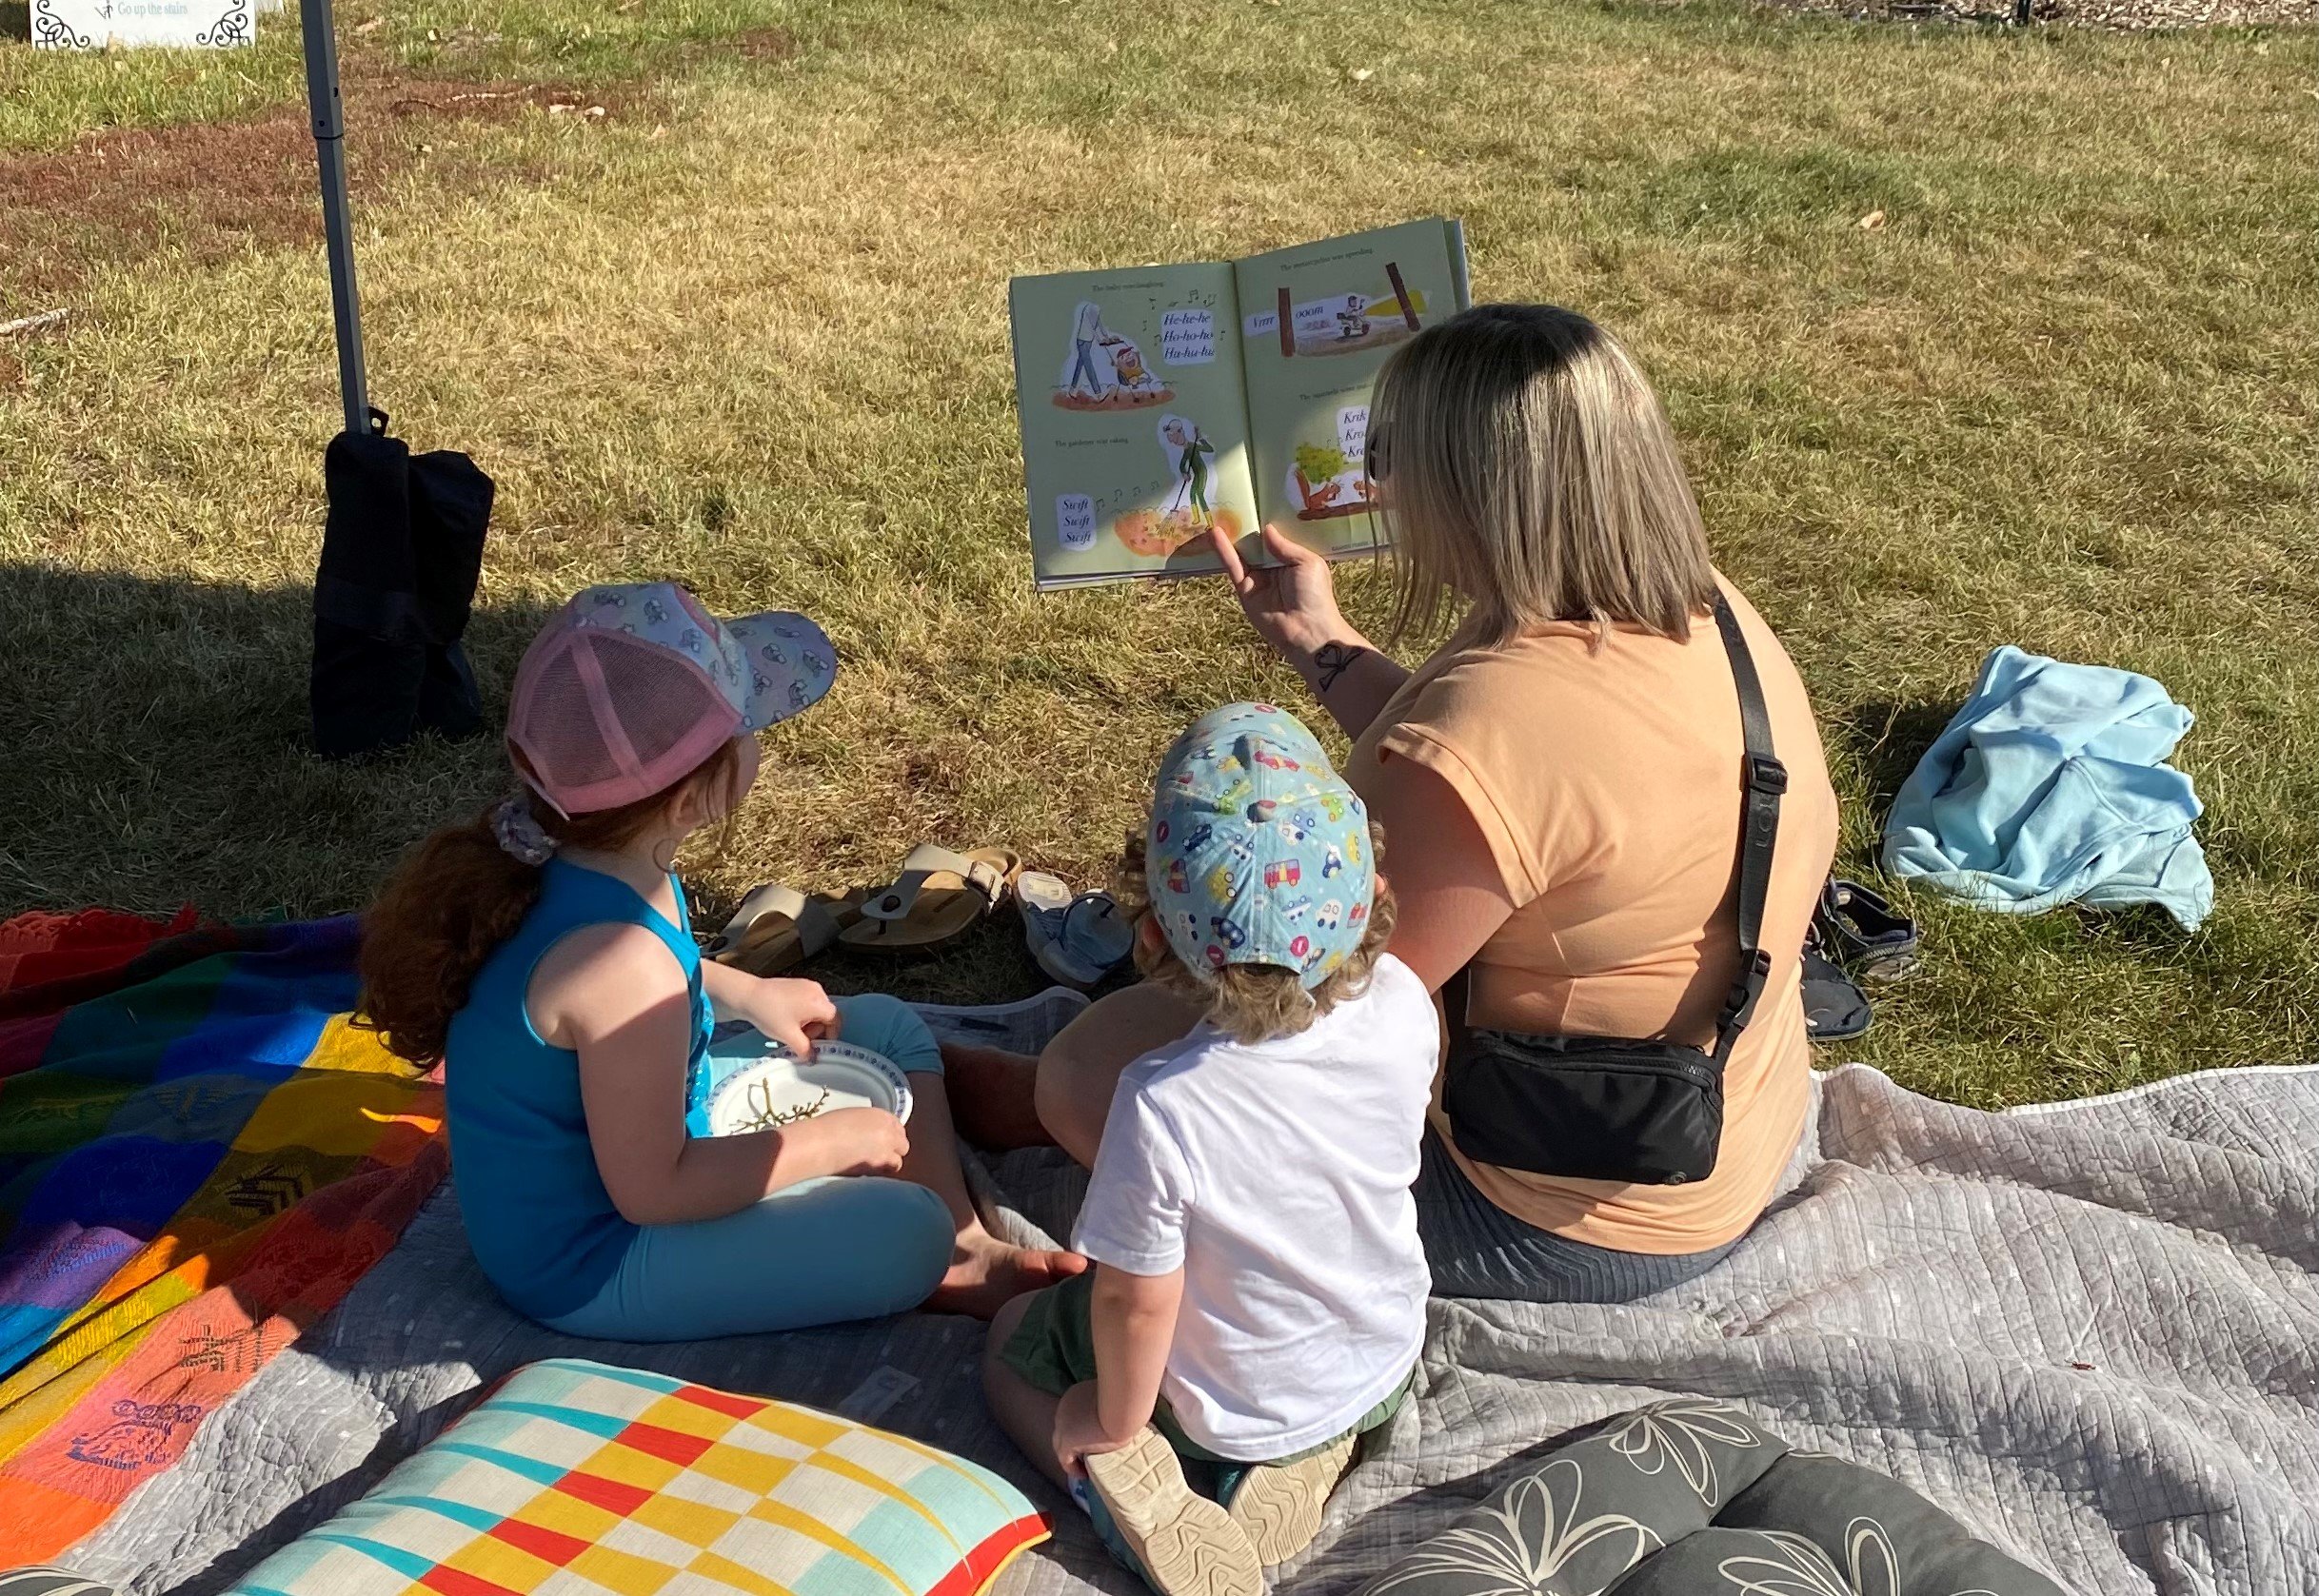 Families reading during one of a reading tent activity